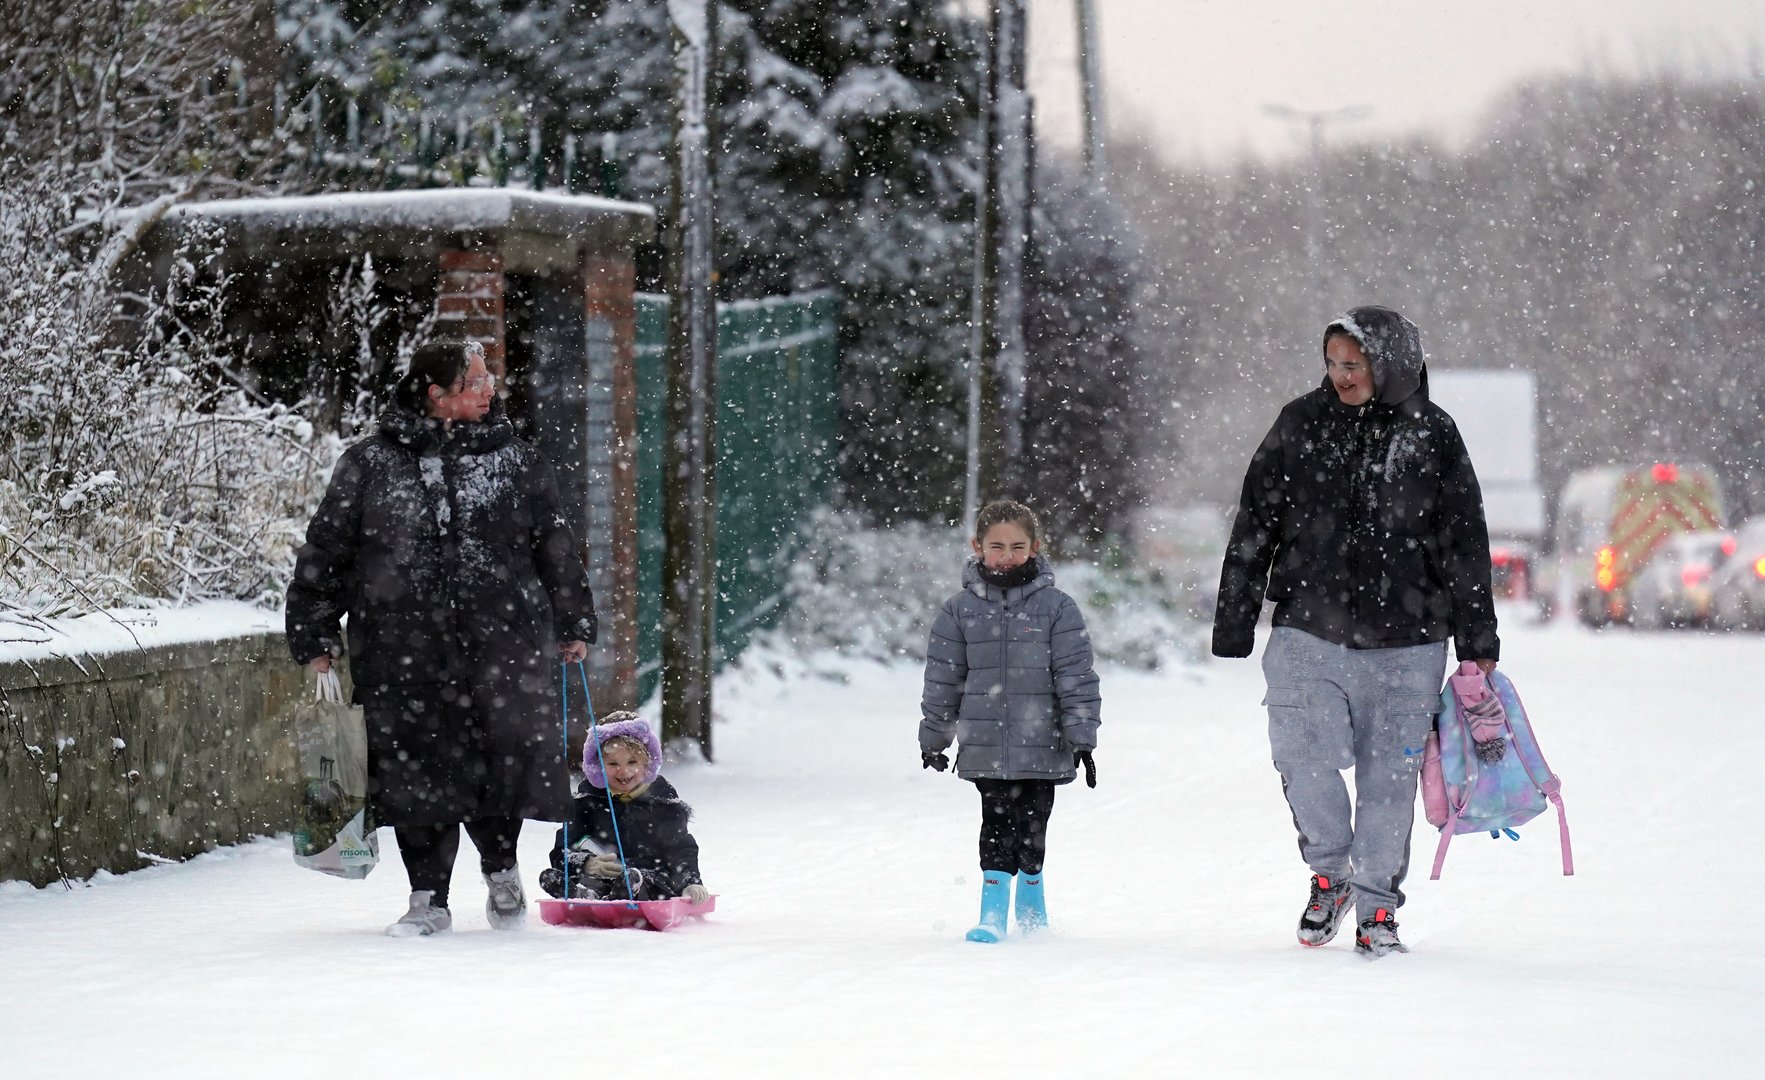 Fresh Snow and Ice Warnings Issued in the UK, Leading to Cancellation of Sporting Events